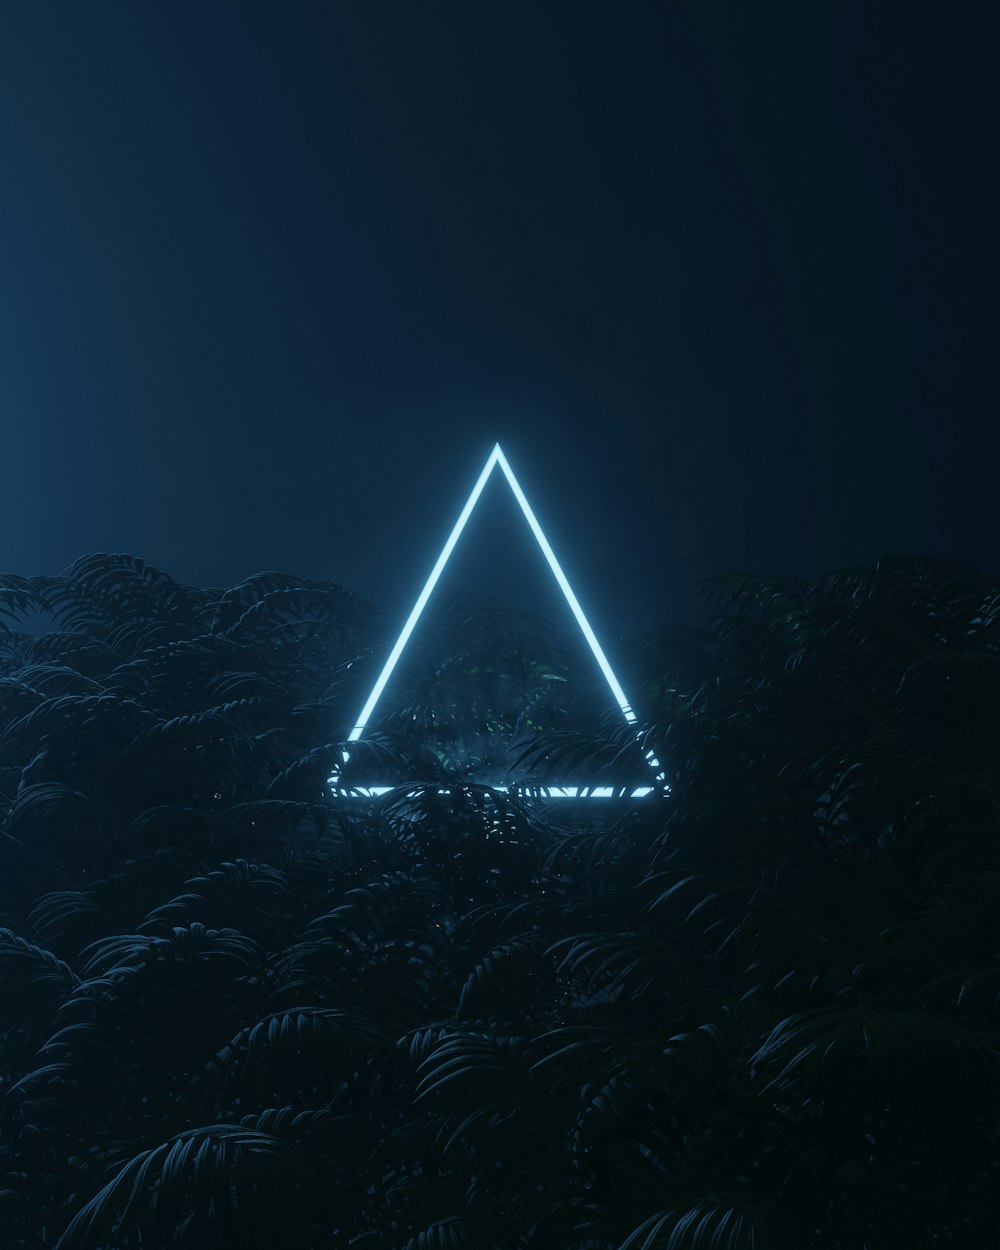 a large pyramid with lights at night